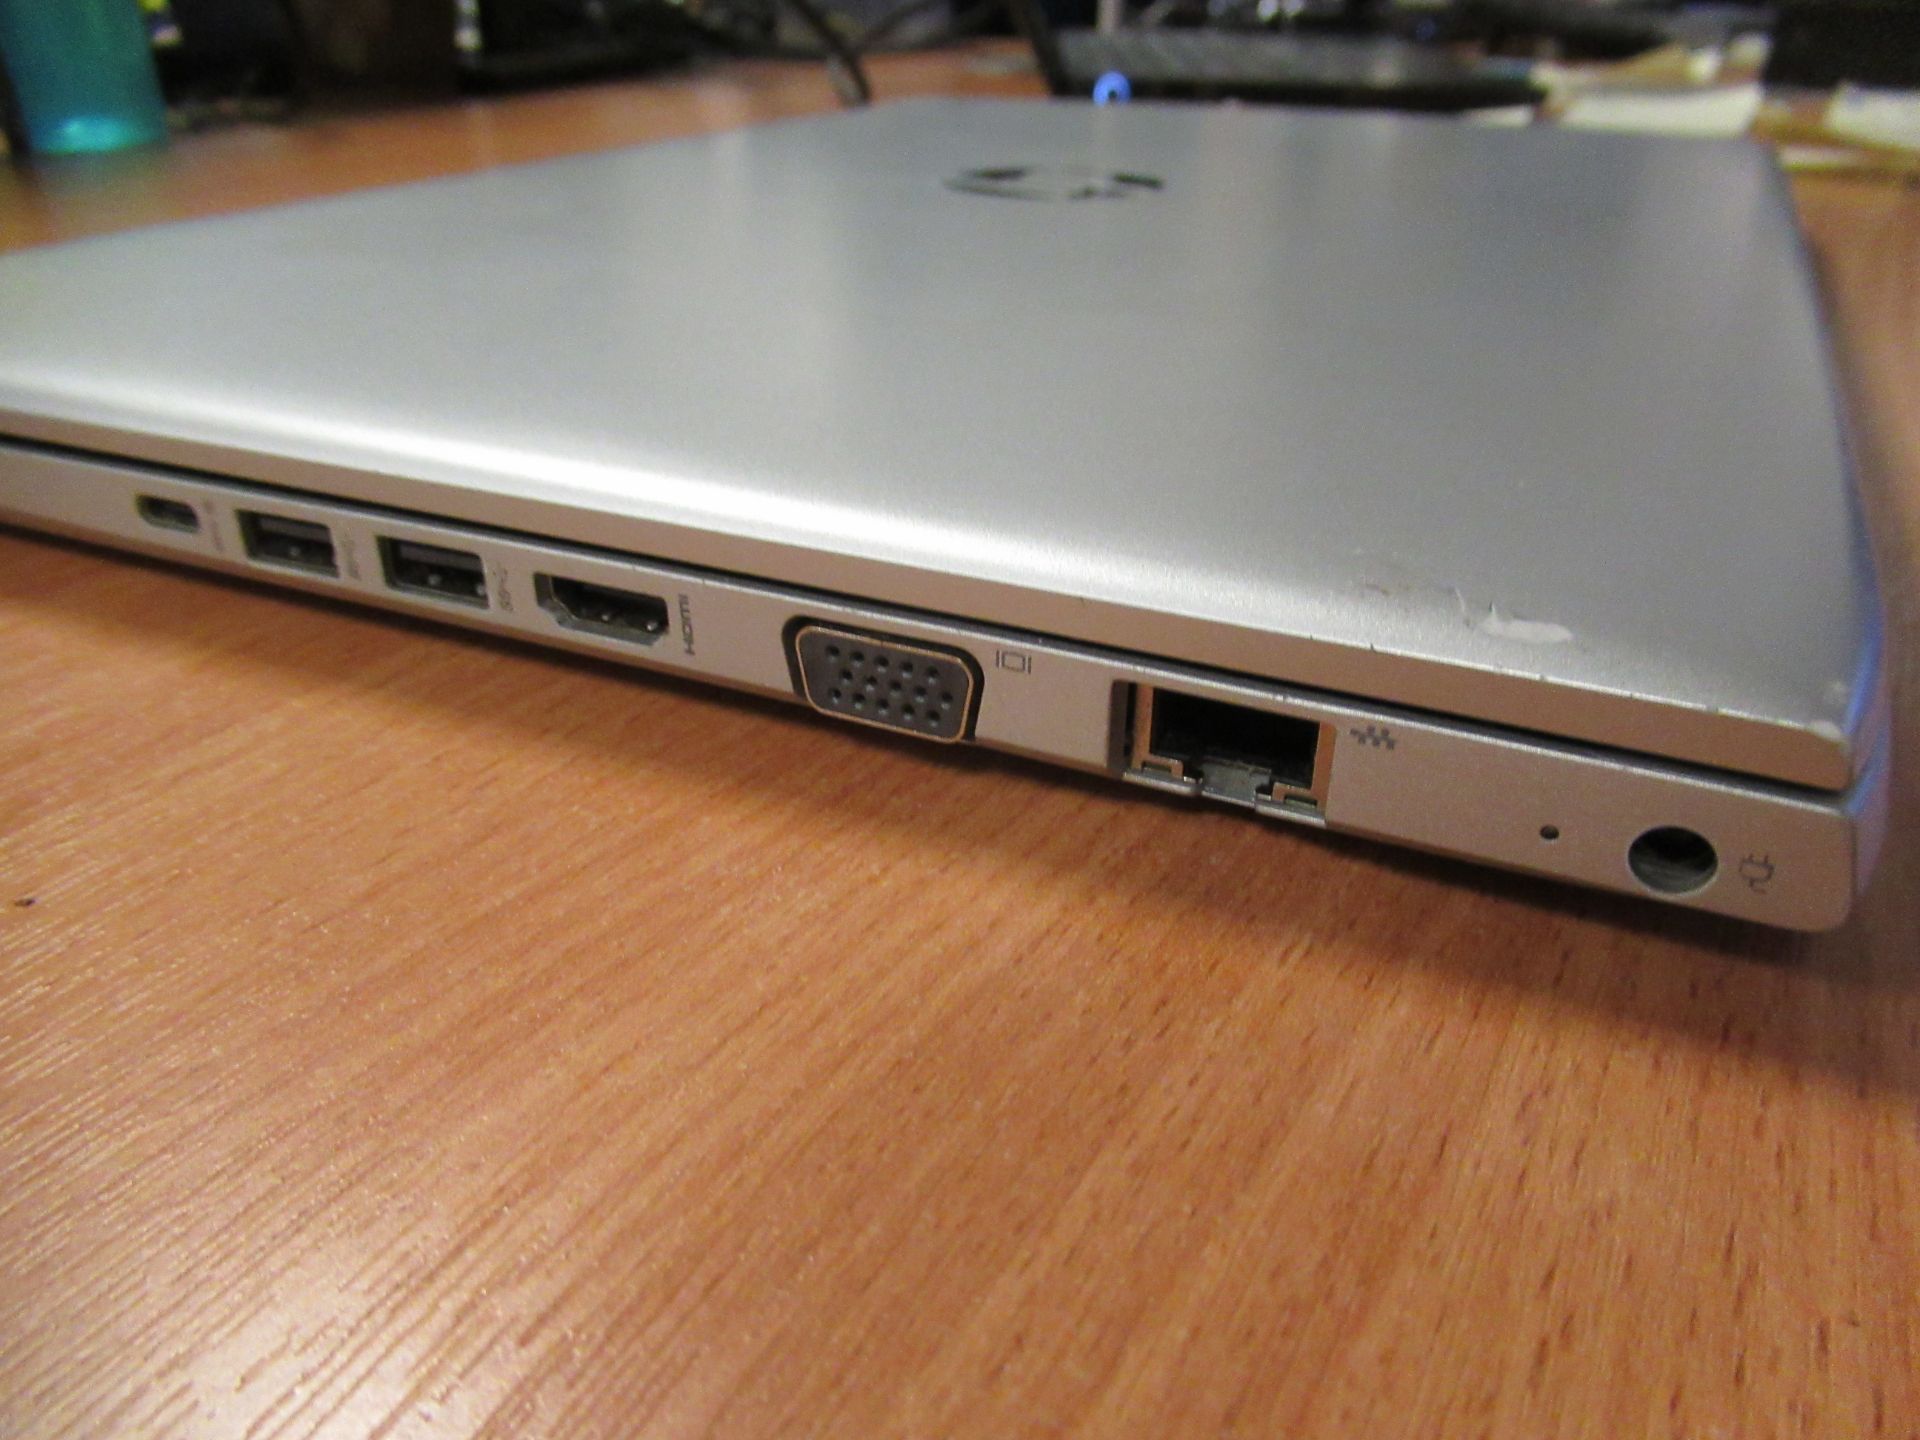 HP ProBook 450G5, s/n 5CD8259THD (no charger) - Image 7 of 8